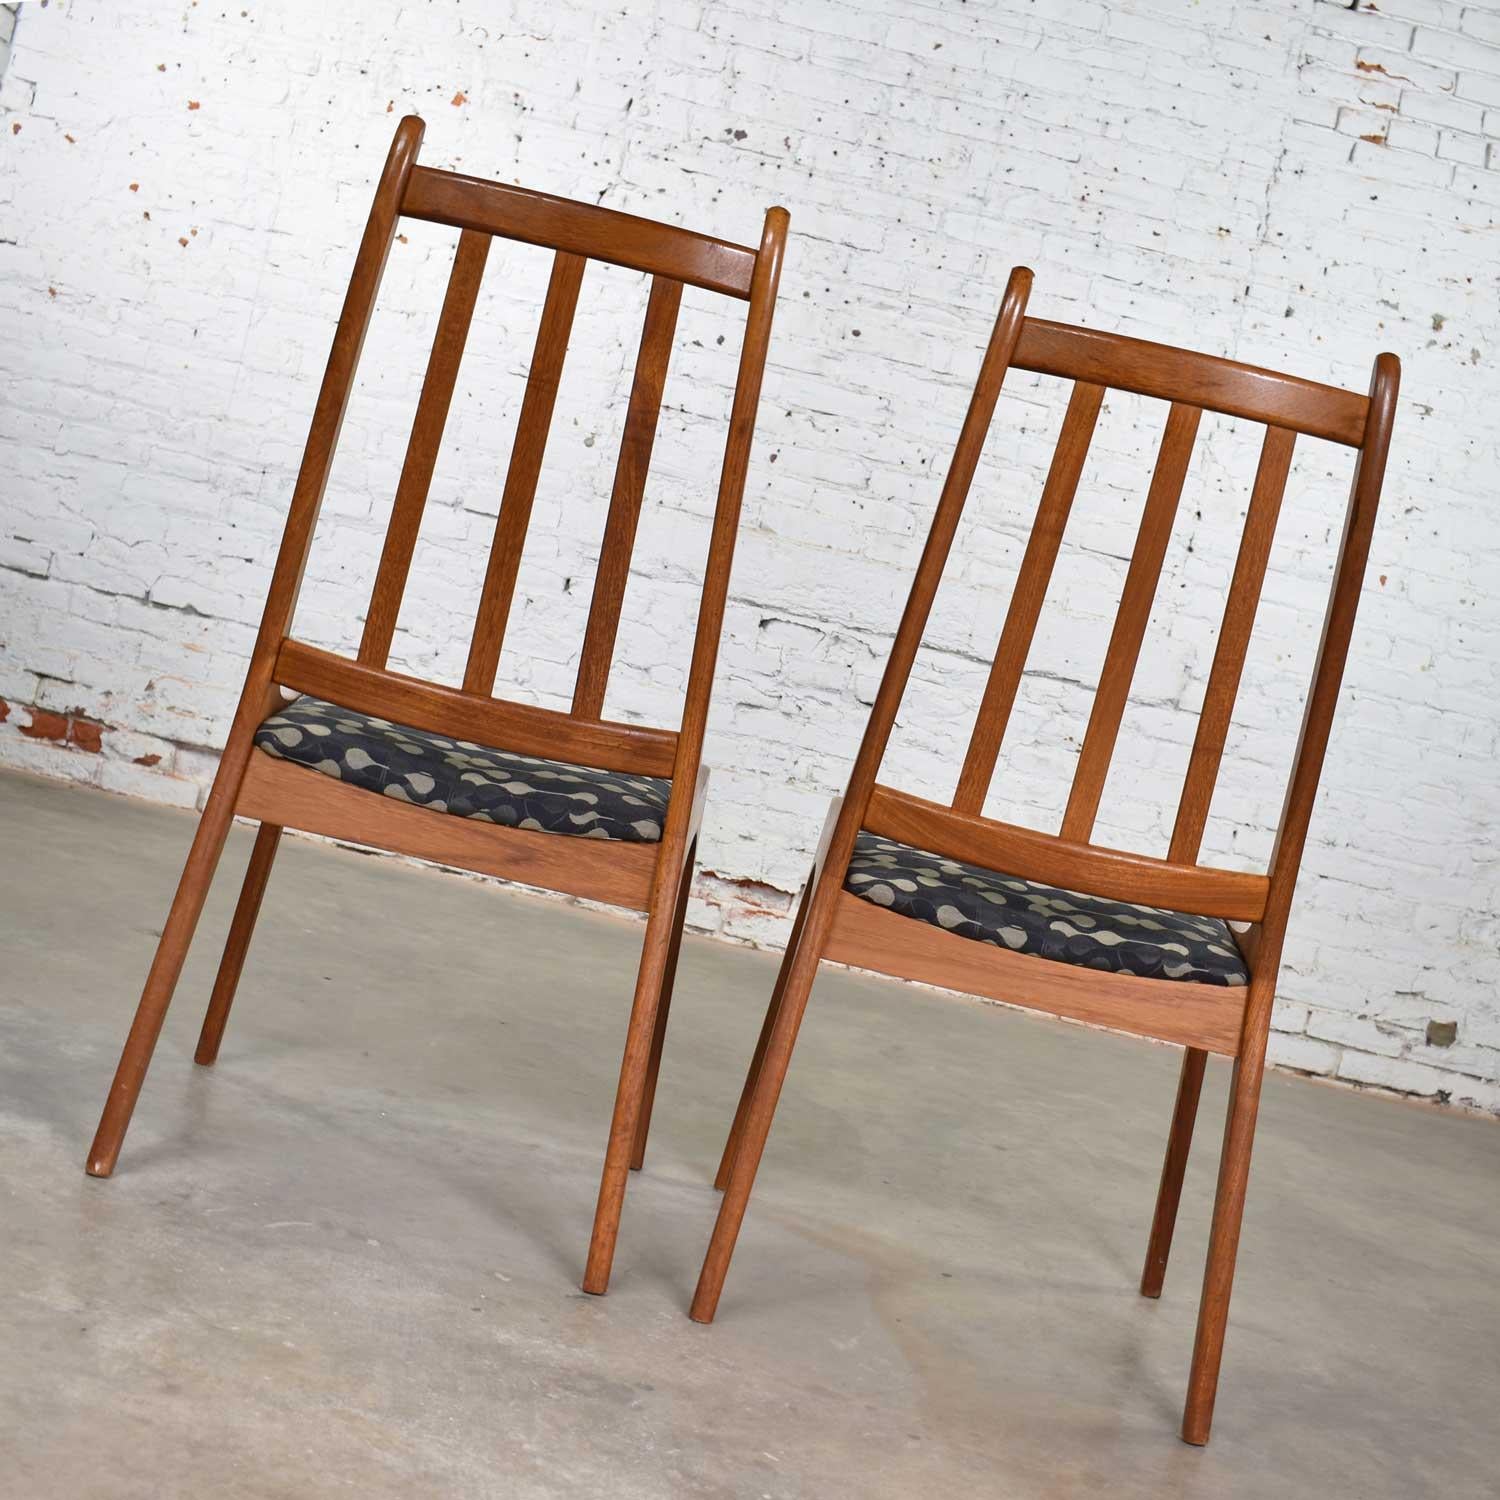 Late 20th Century Pair of Scandinavian Modern Teak Side Chairs by Nordic of Ontario Canada